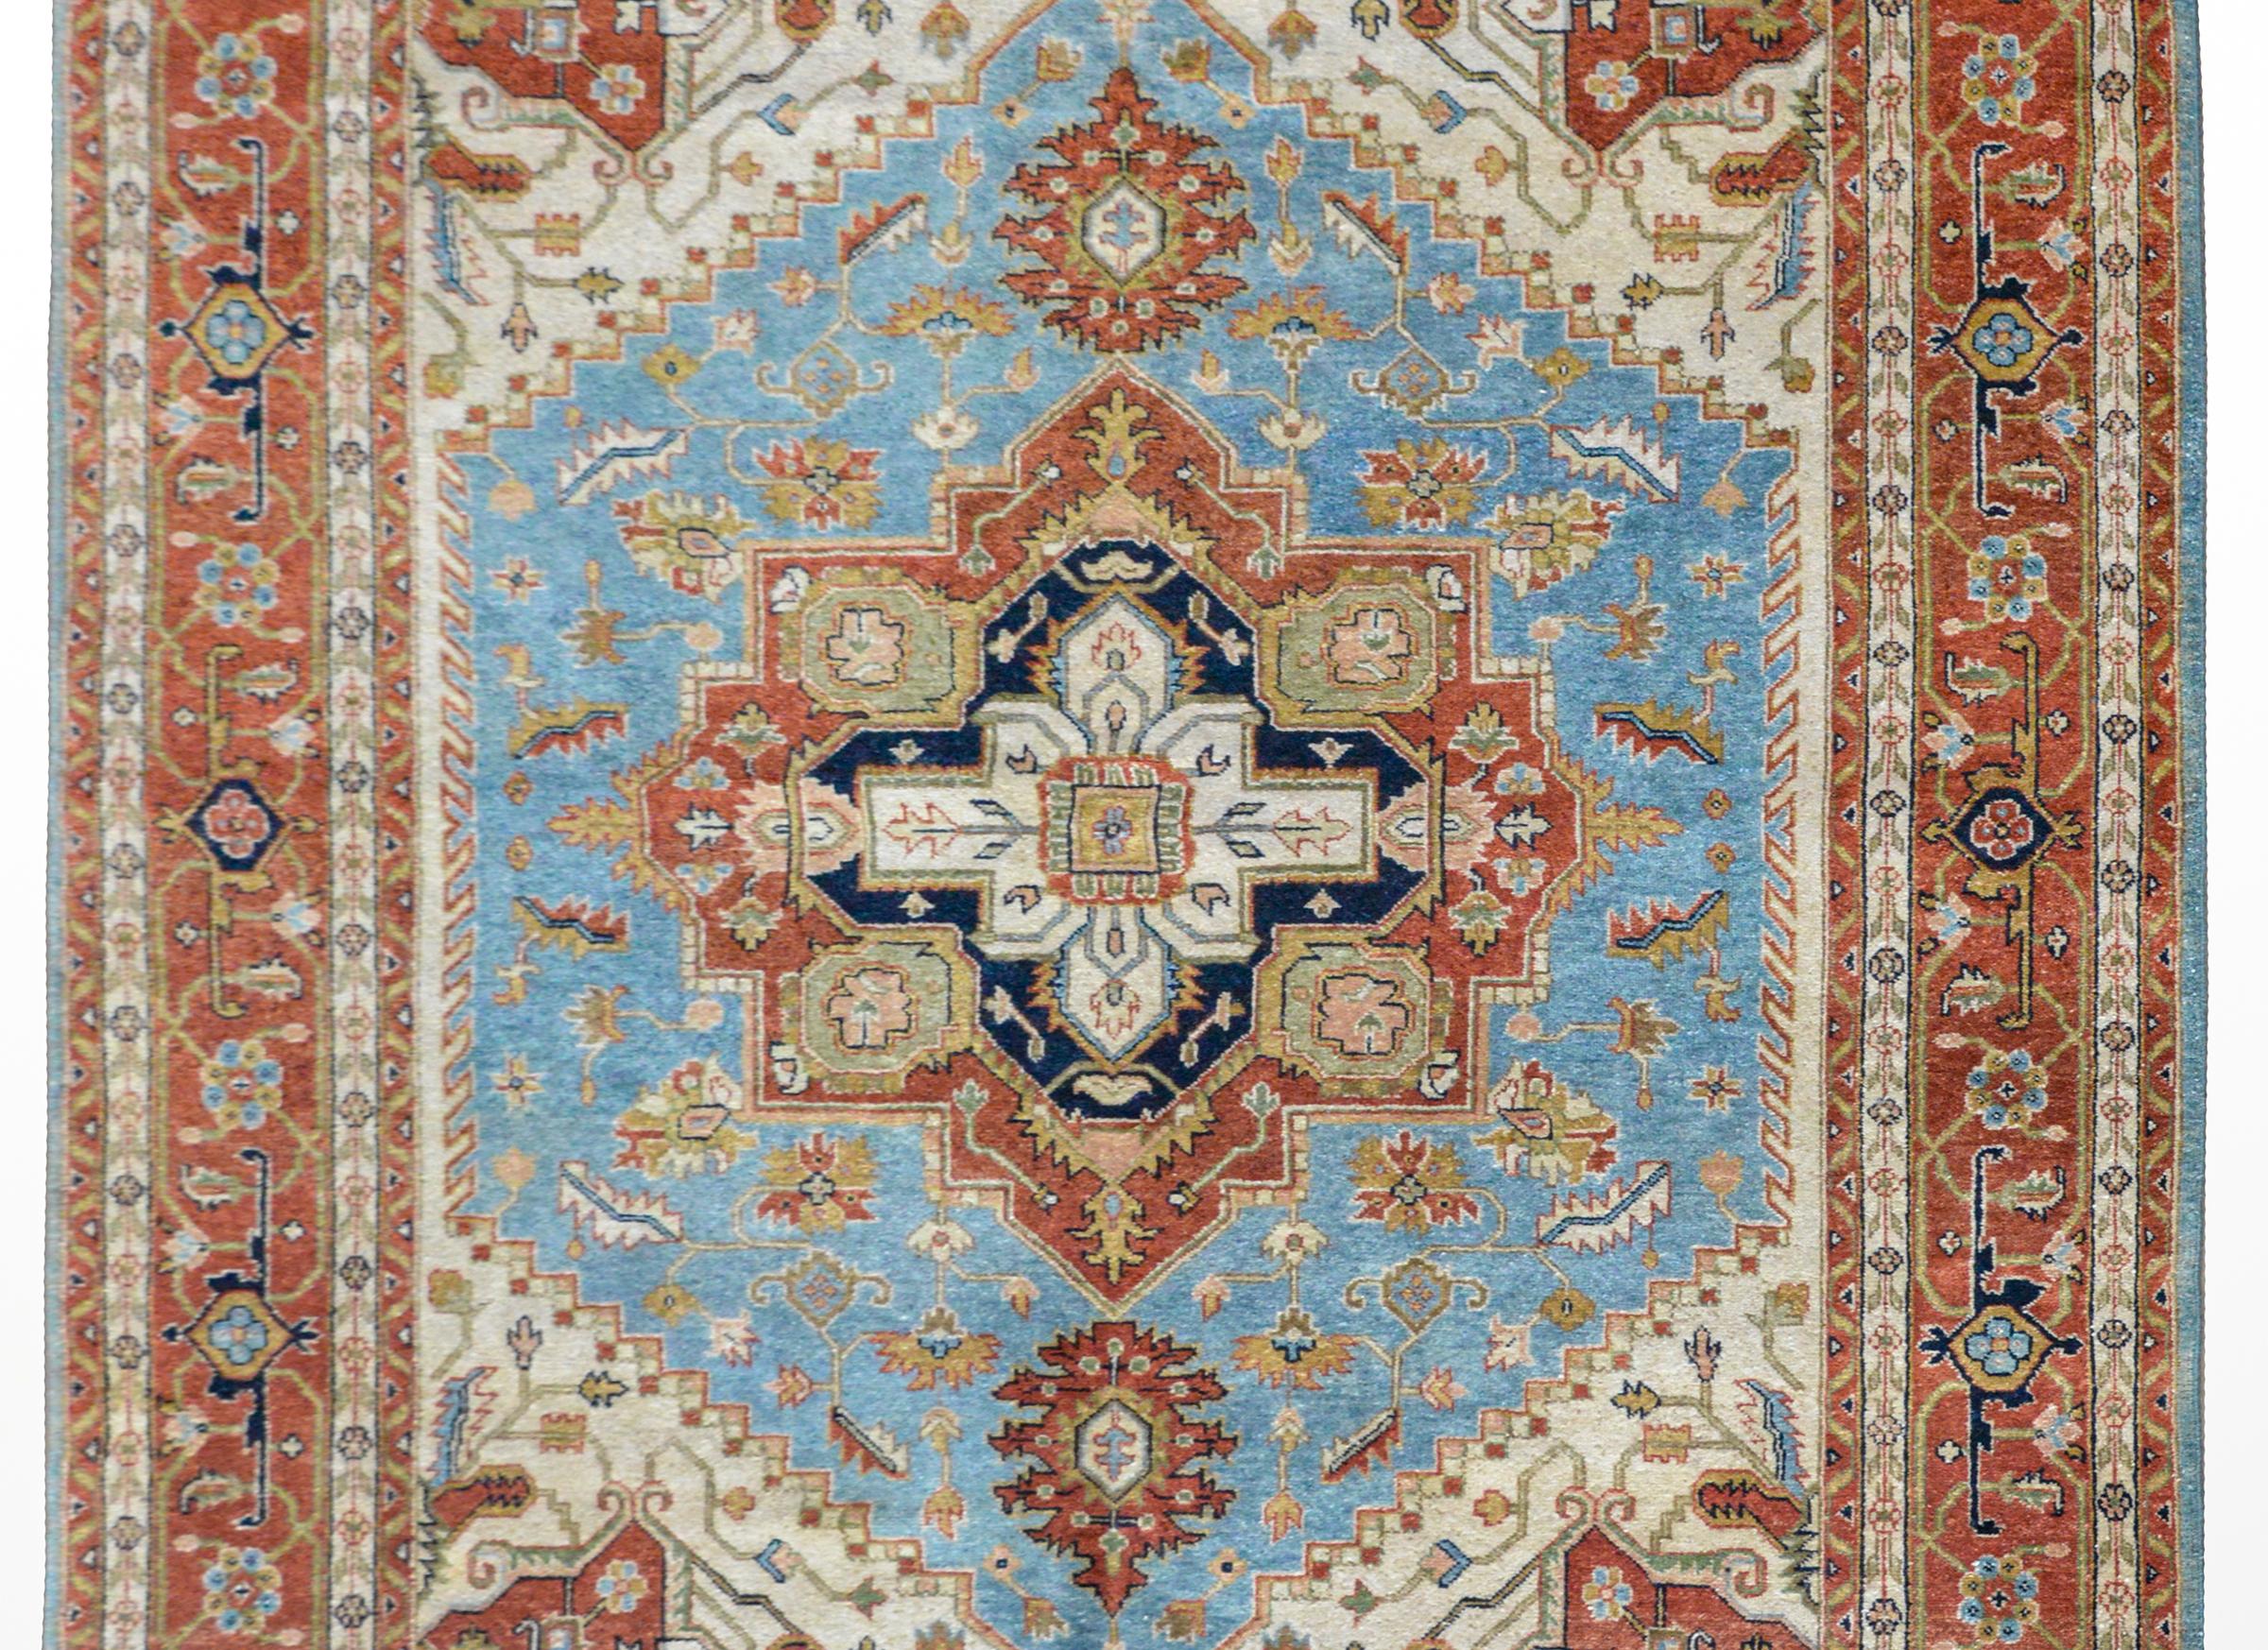 A beautiful hand knotted Indian Heriz-style rug with a traditional pattern containing a large central floral medallion woven in burnt orange, ochre, dark indigo, and pink, against a field of flowers set against a light indigo background. The border